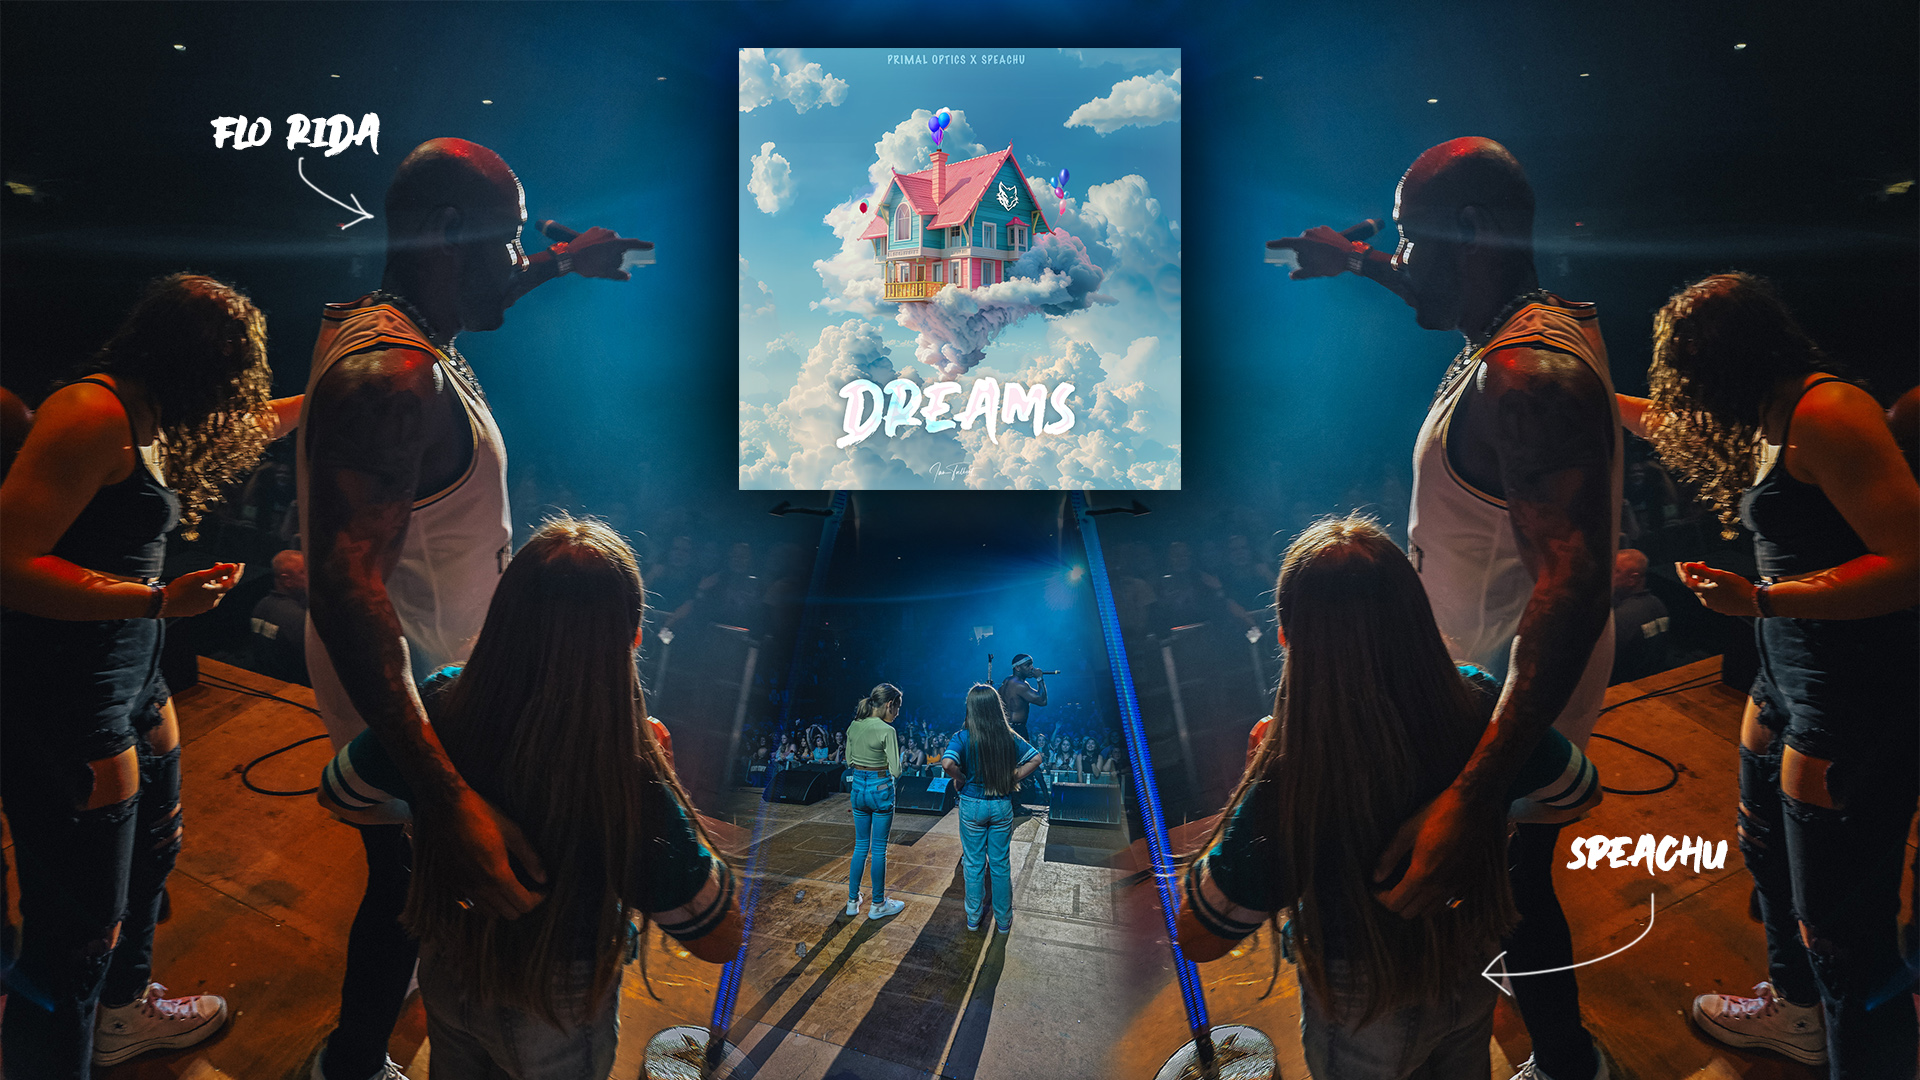 8-Year-Old Speachu Teams Up with Dad (Primal Optics) for Hit Single “Dreams”